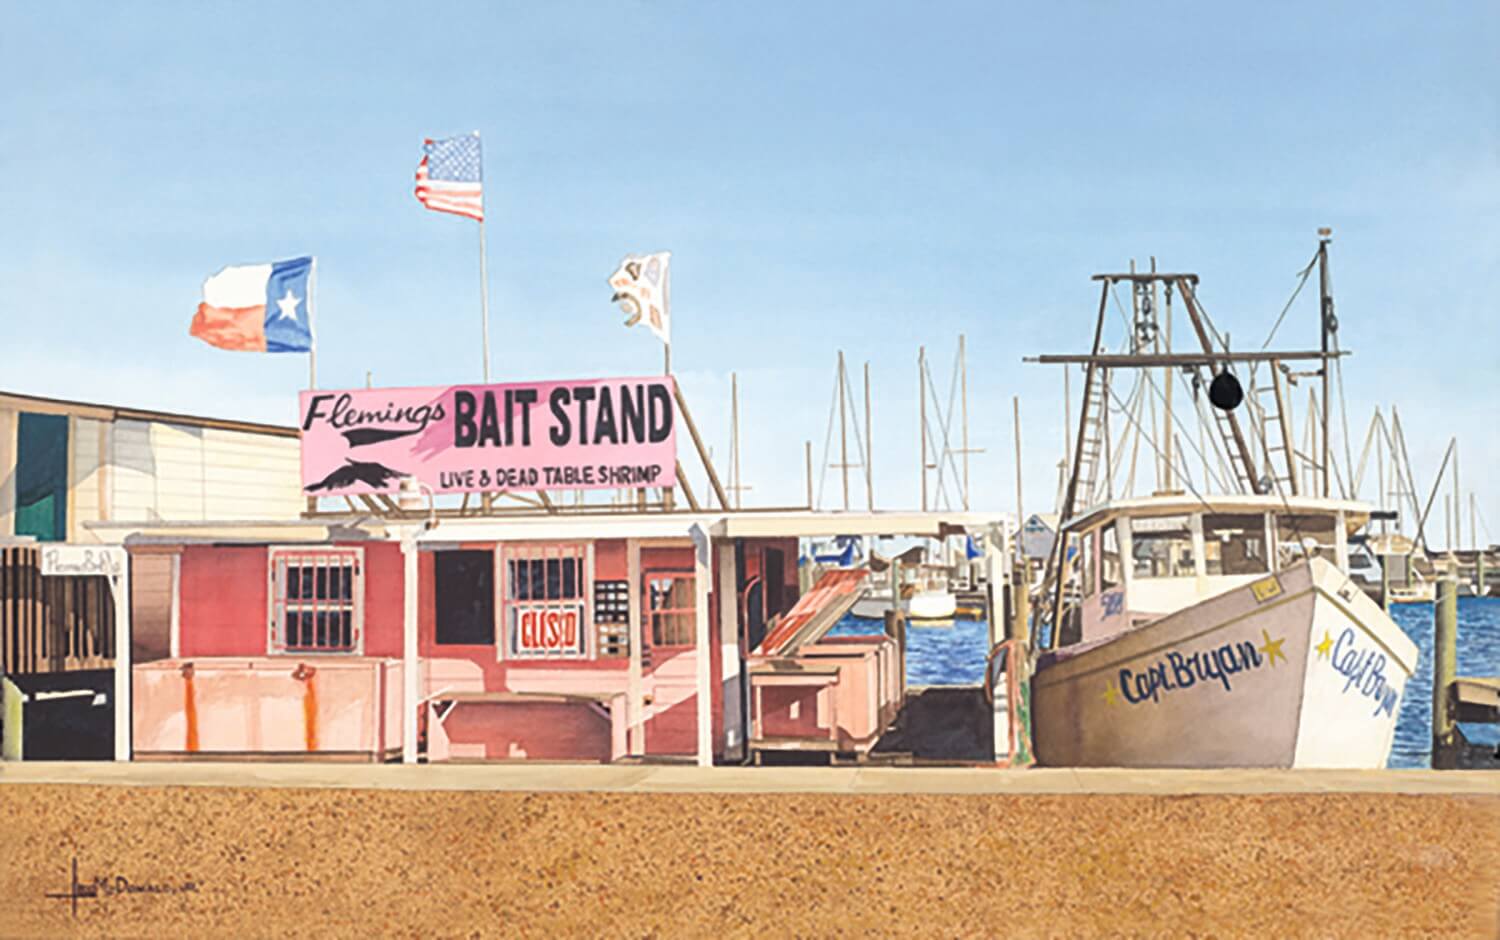 "Fleming's Bait Stand"